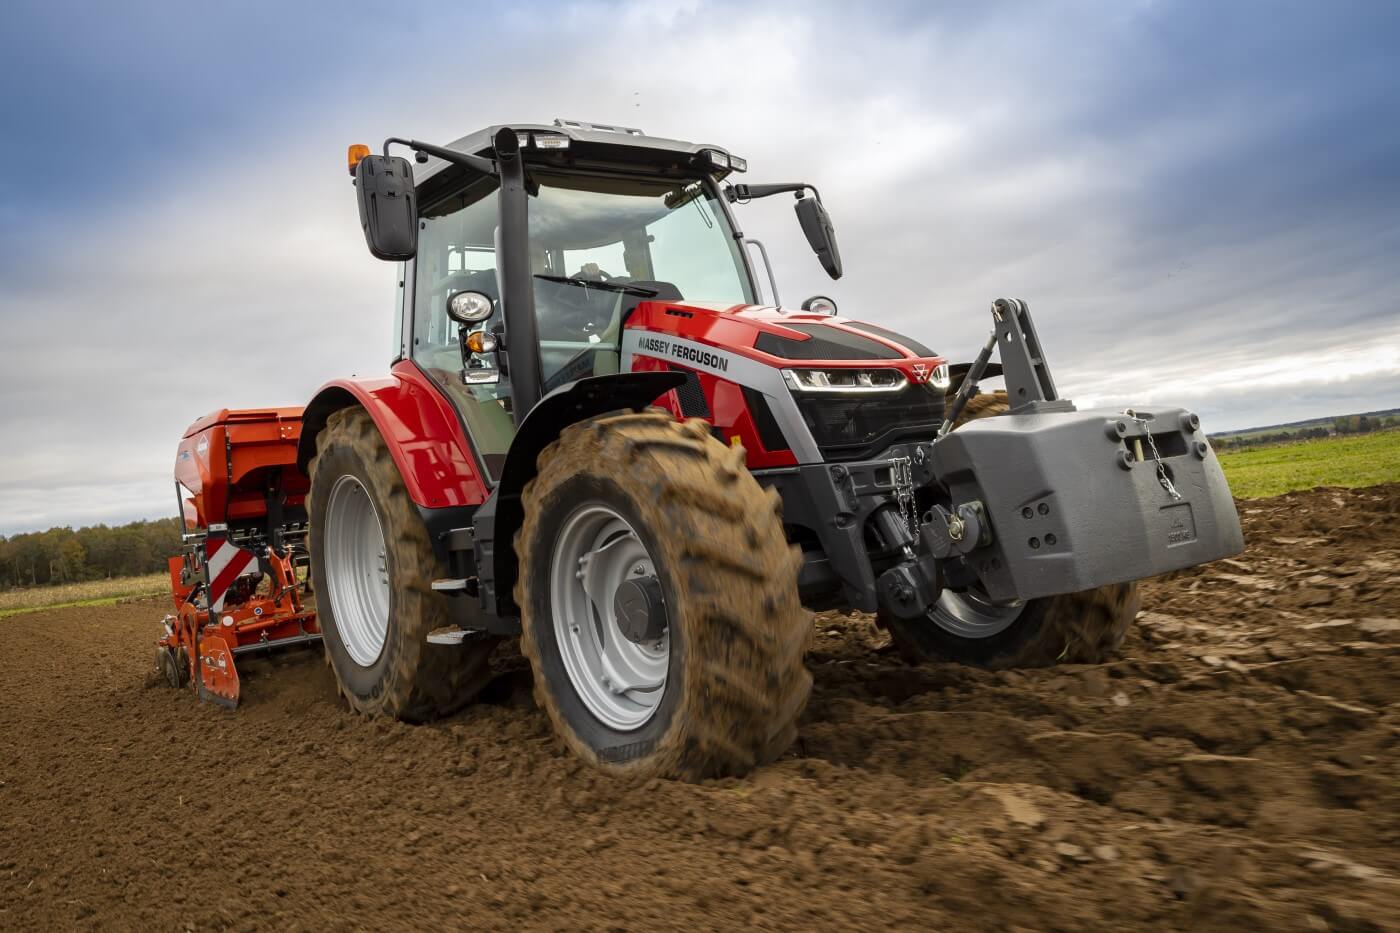 Equipped to work faster with the widest implements 